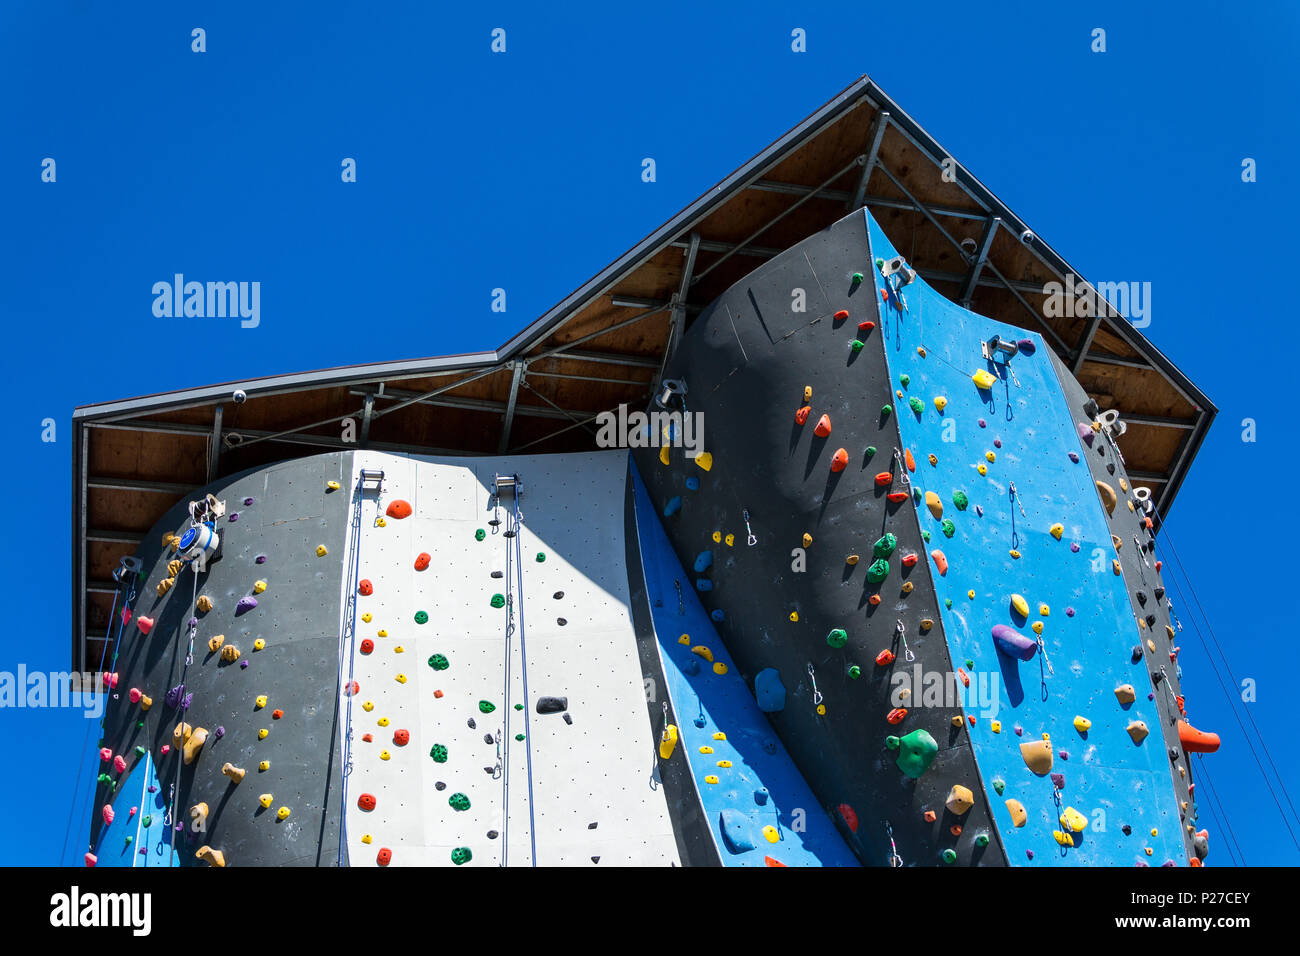 Rock Climbing Wall With Holds Stock Photos & Rock Climbing Wall With ...